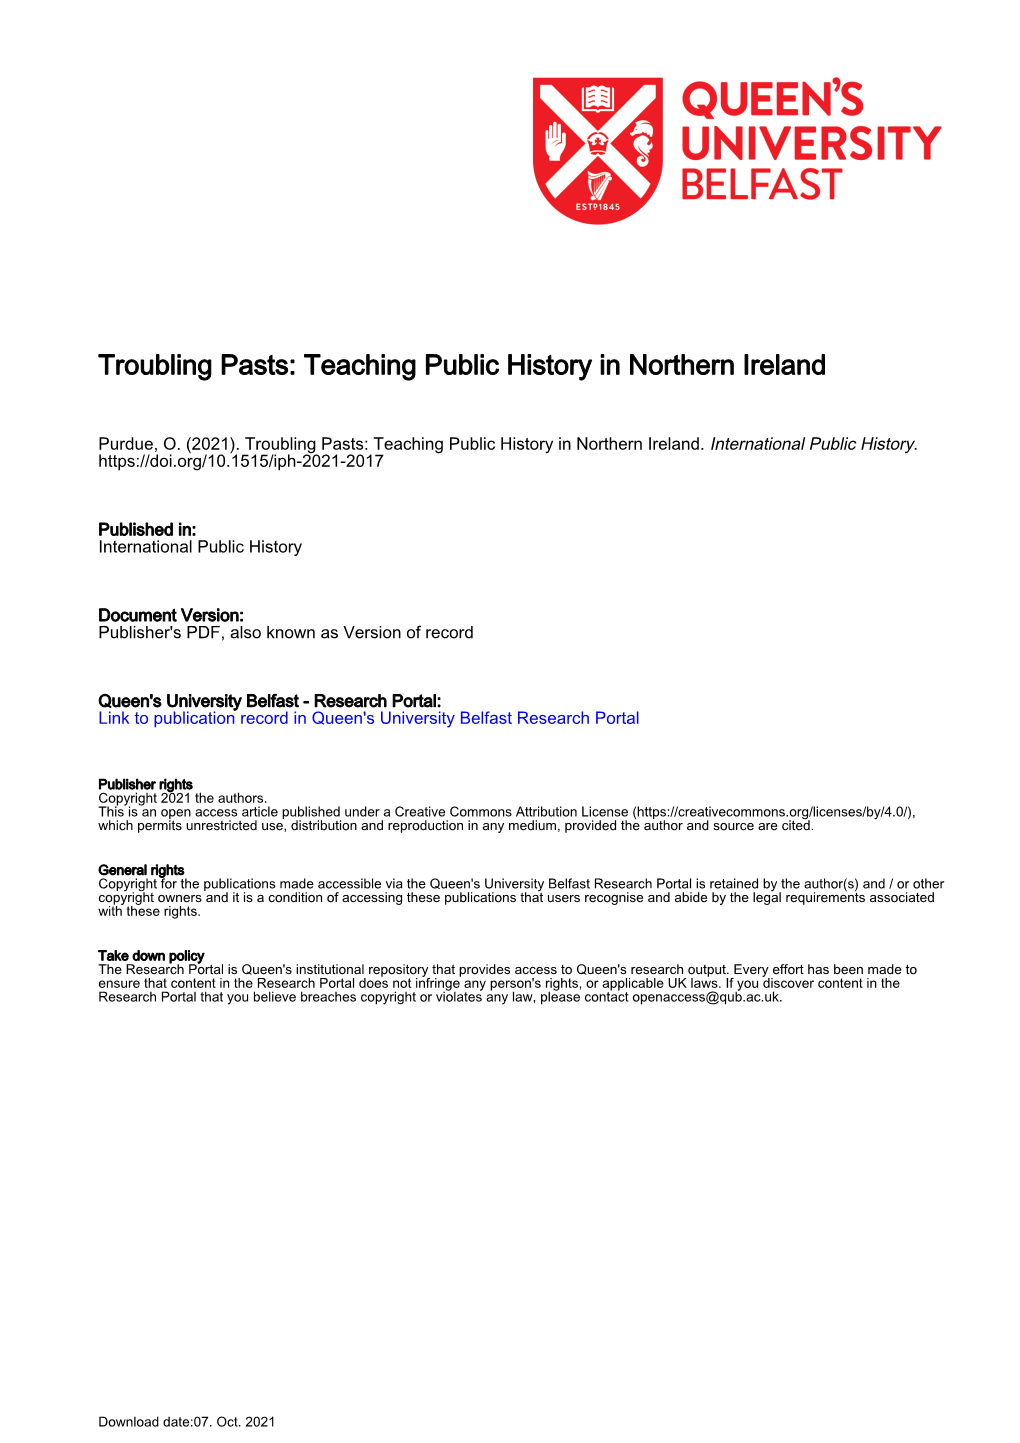 Troubling Pasts: Teaching Public History in Northern Ireland